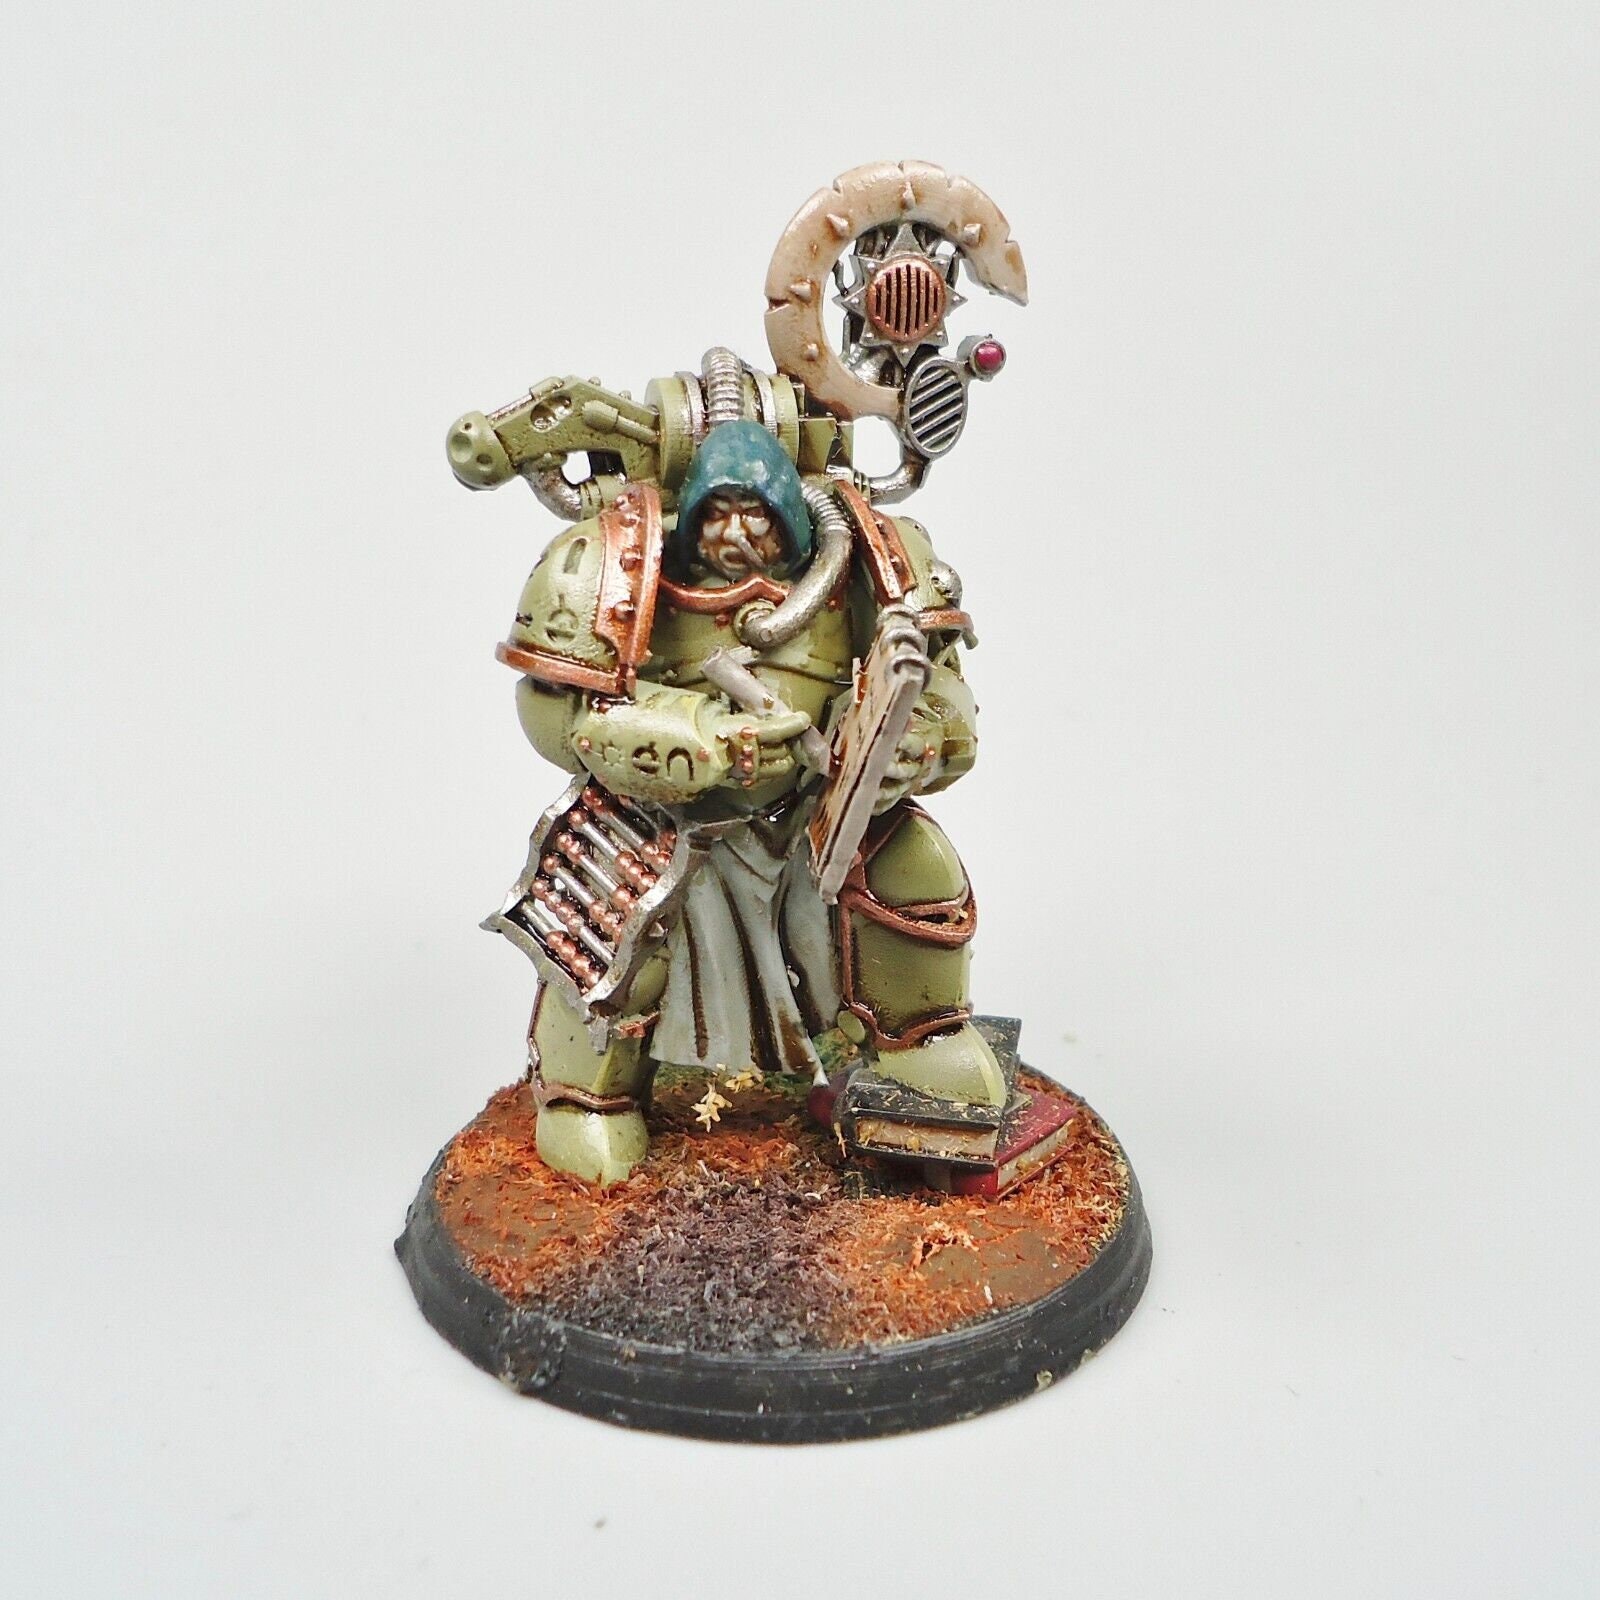 Death Guard Knight is ready to spread the plague! : r/Warhammer40k